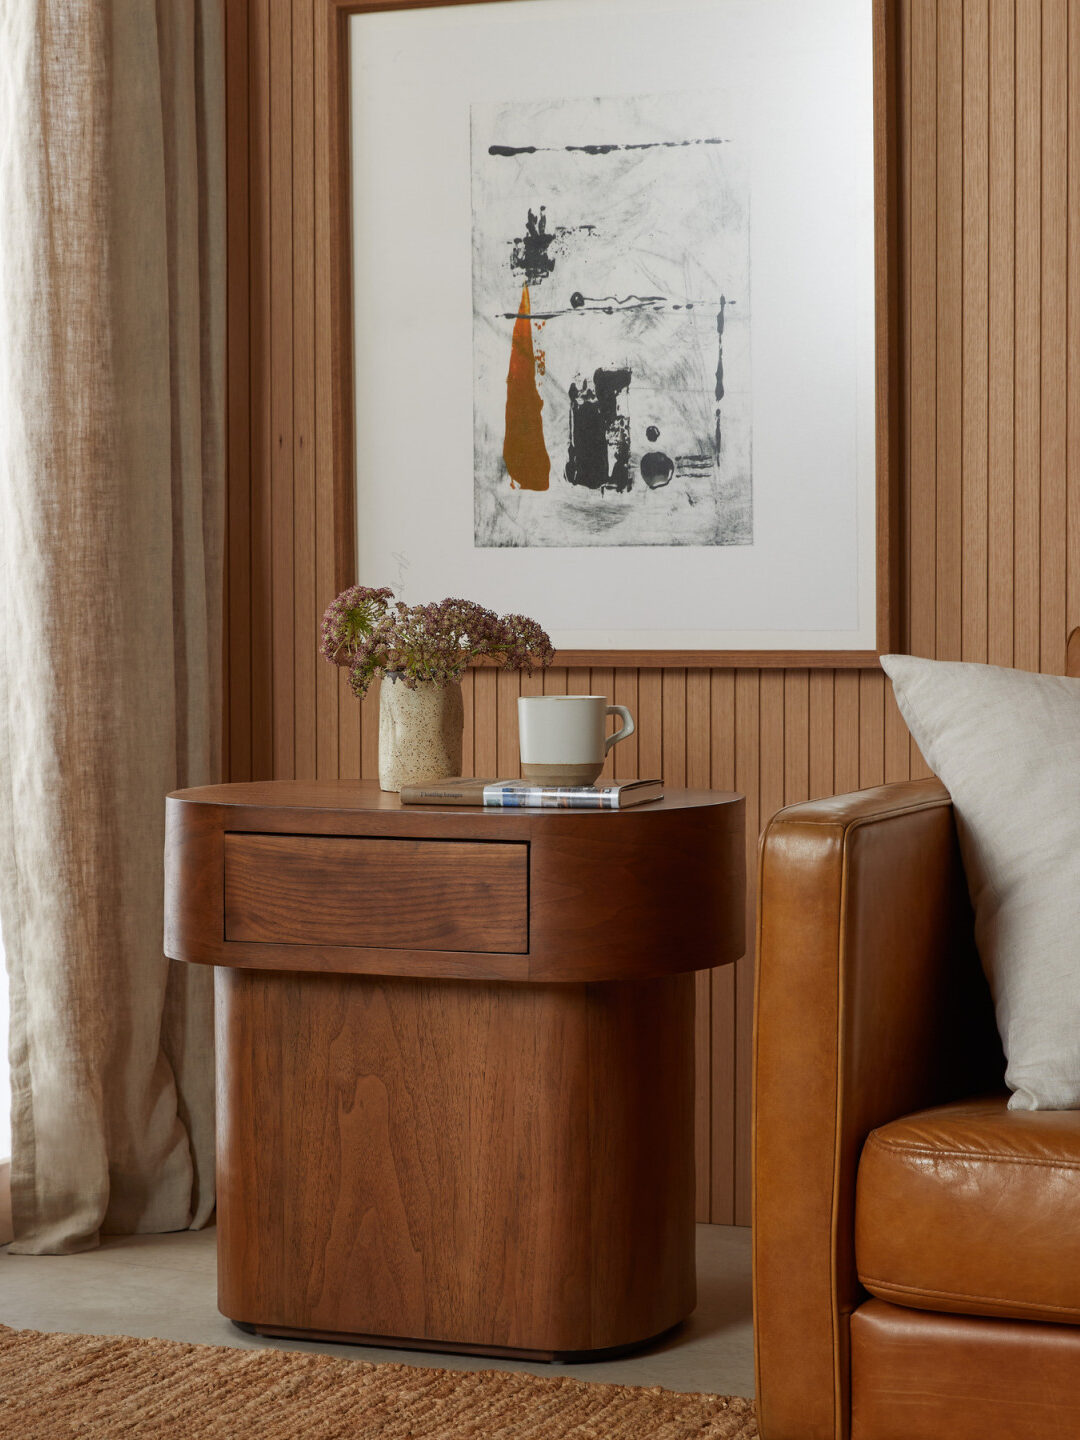 A rounded wooden side table in a styled room.